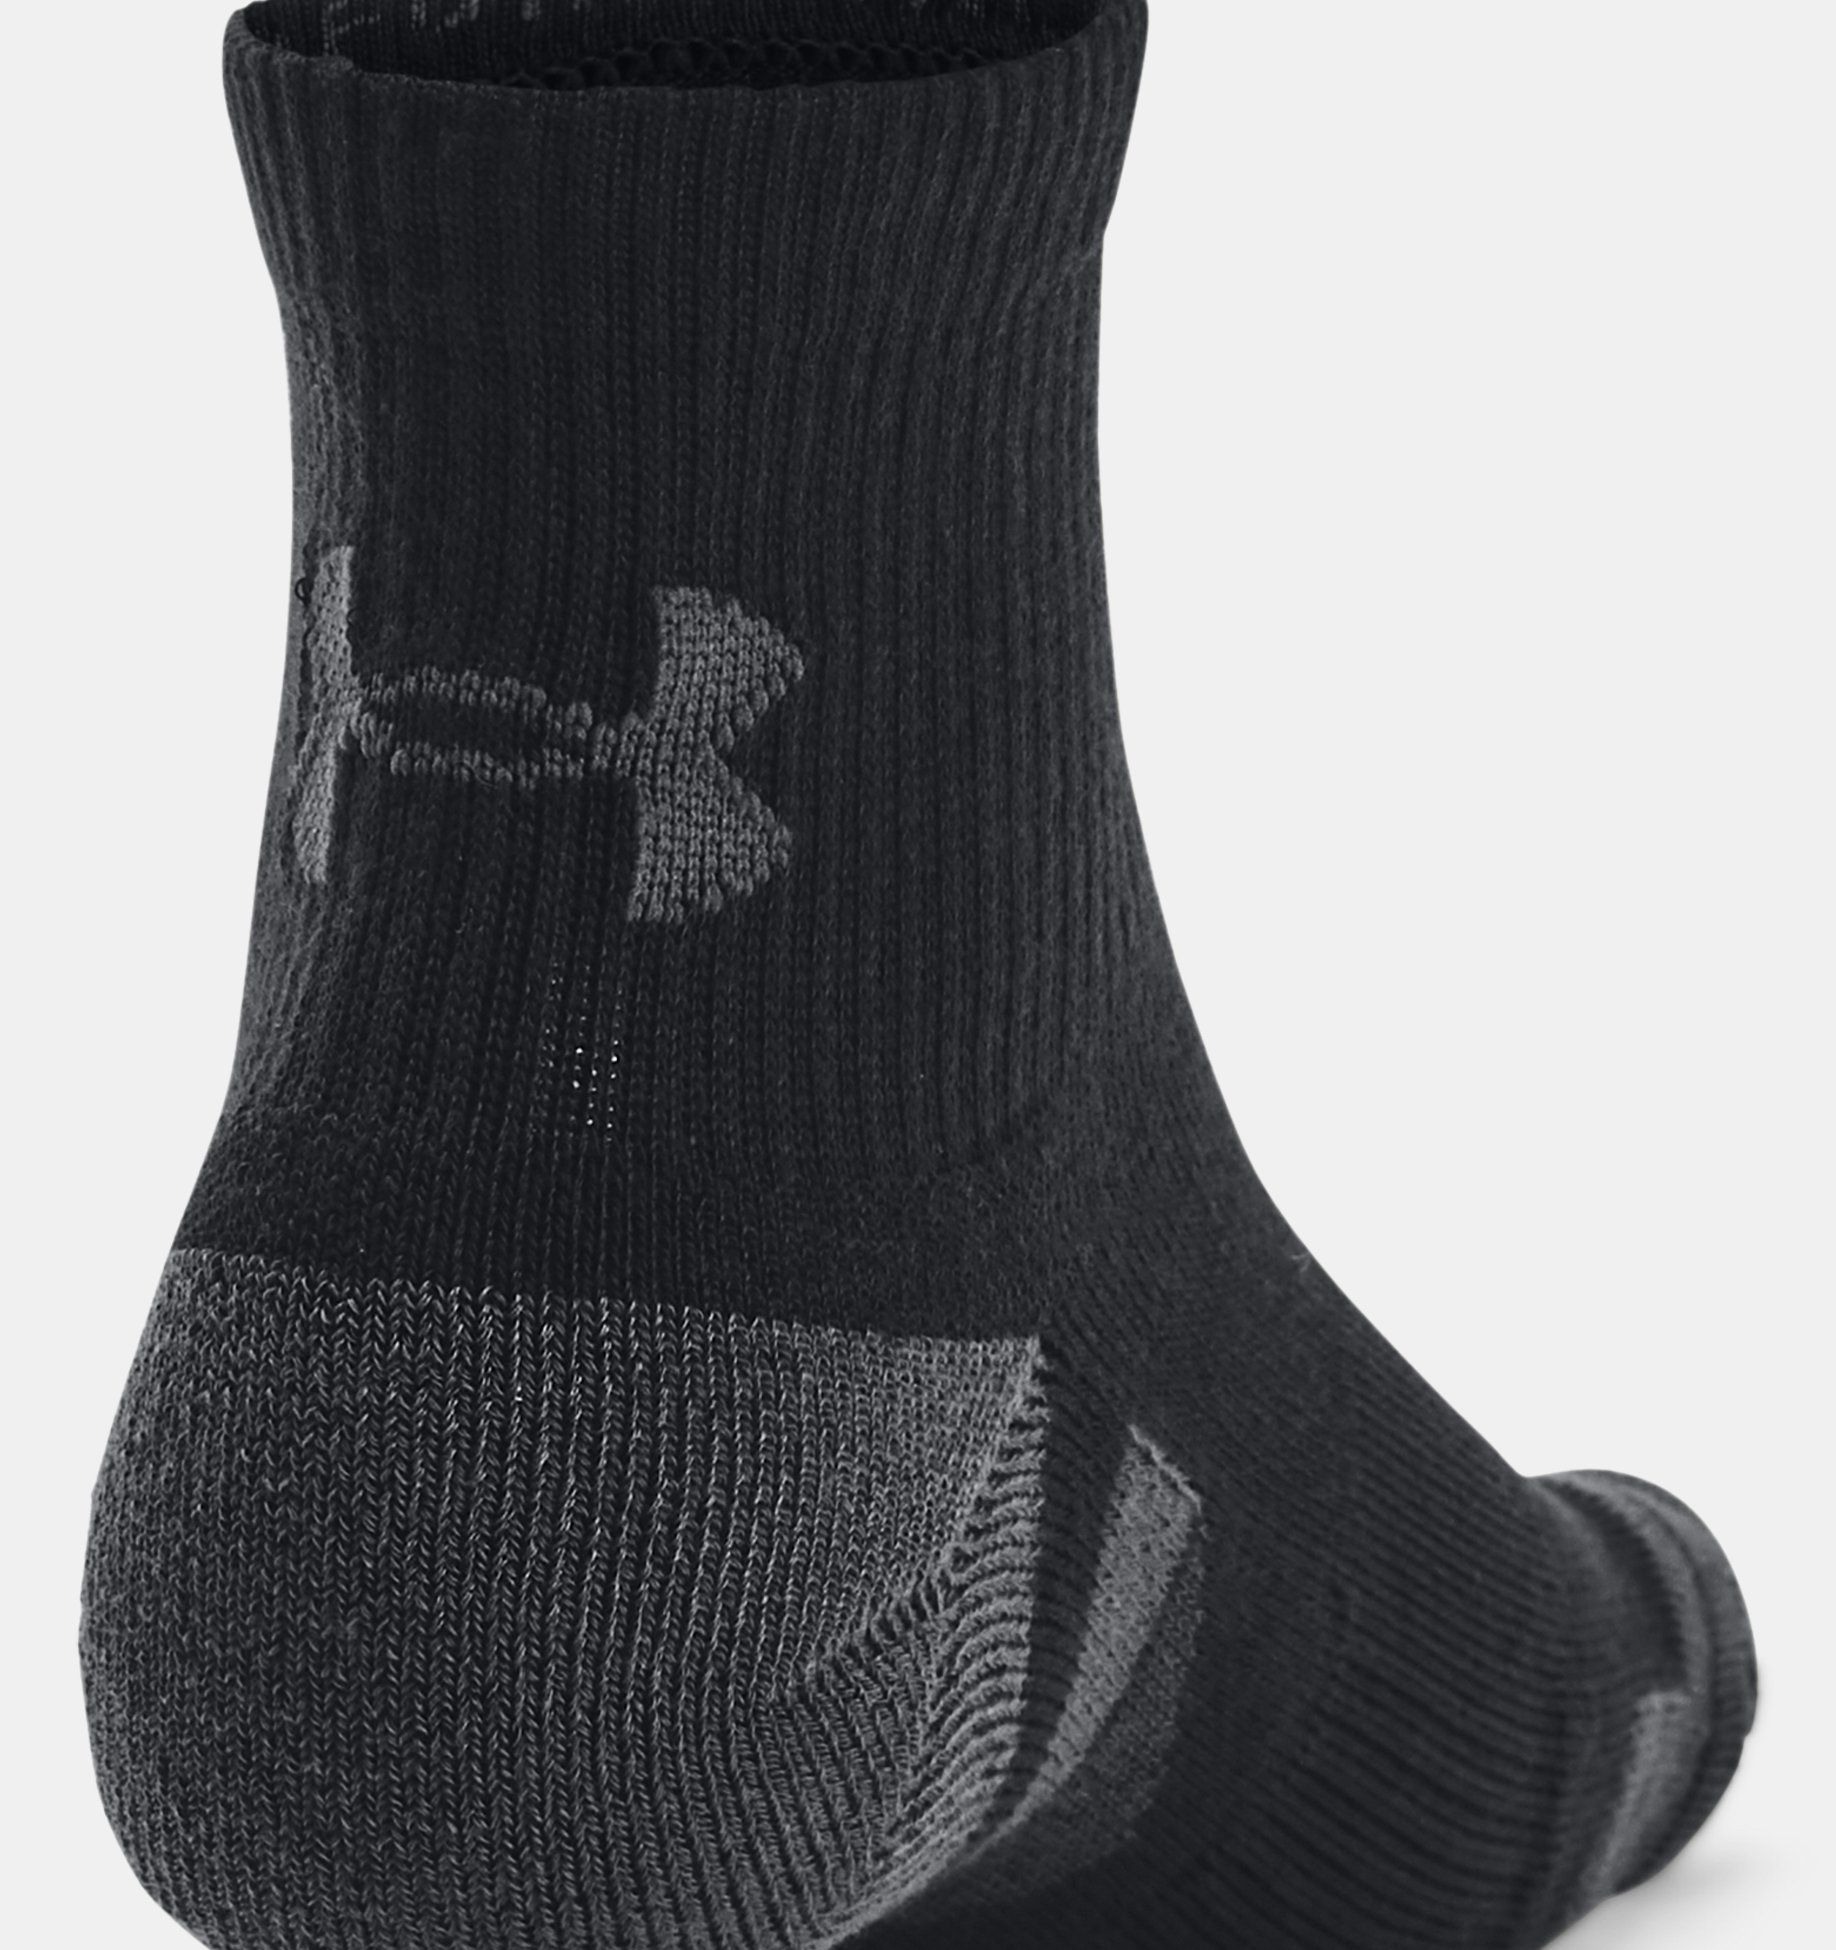 Under Armour Calcetines de corte bajo Youth Performance Tech, multipares